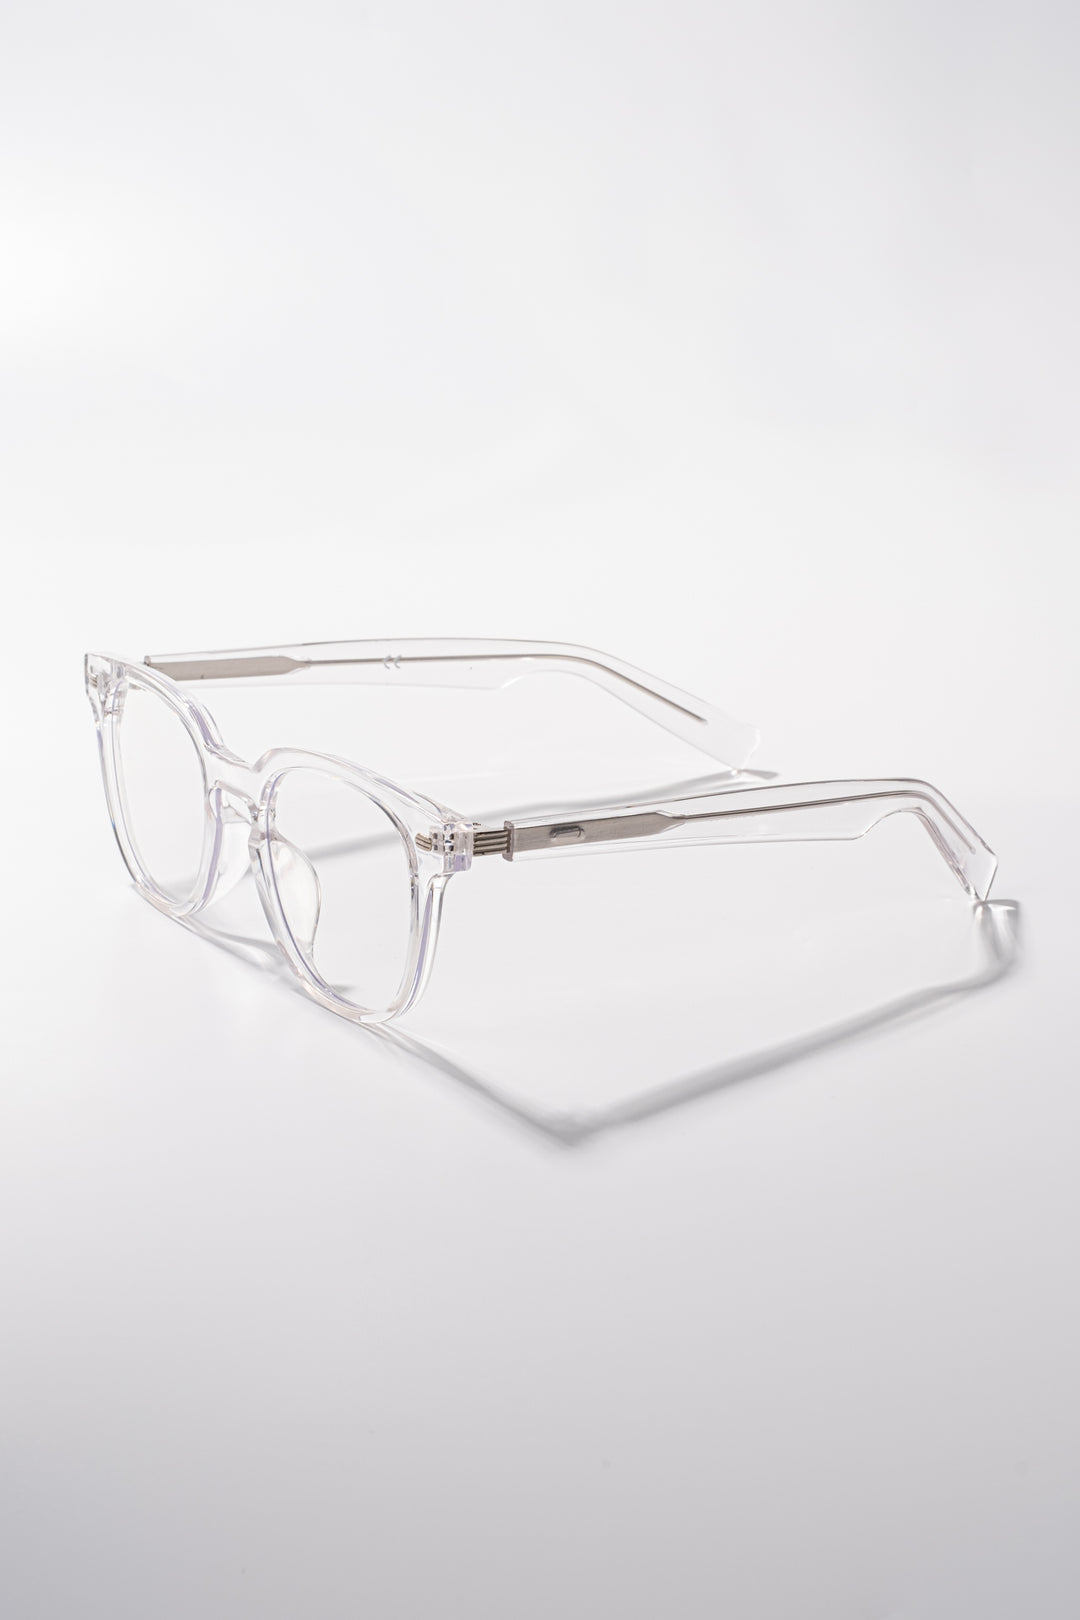 Type Blue Light Protection Glasses